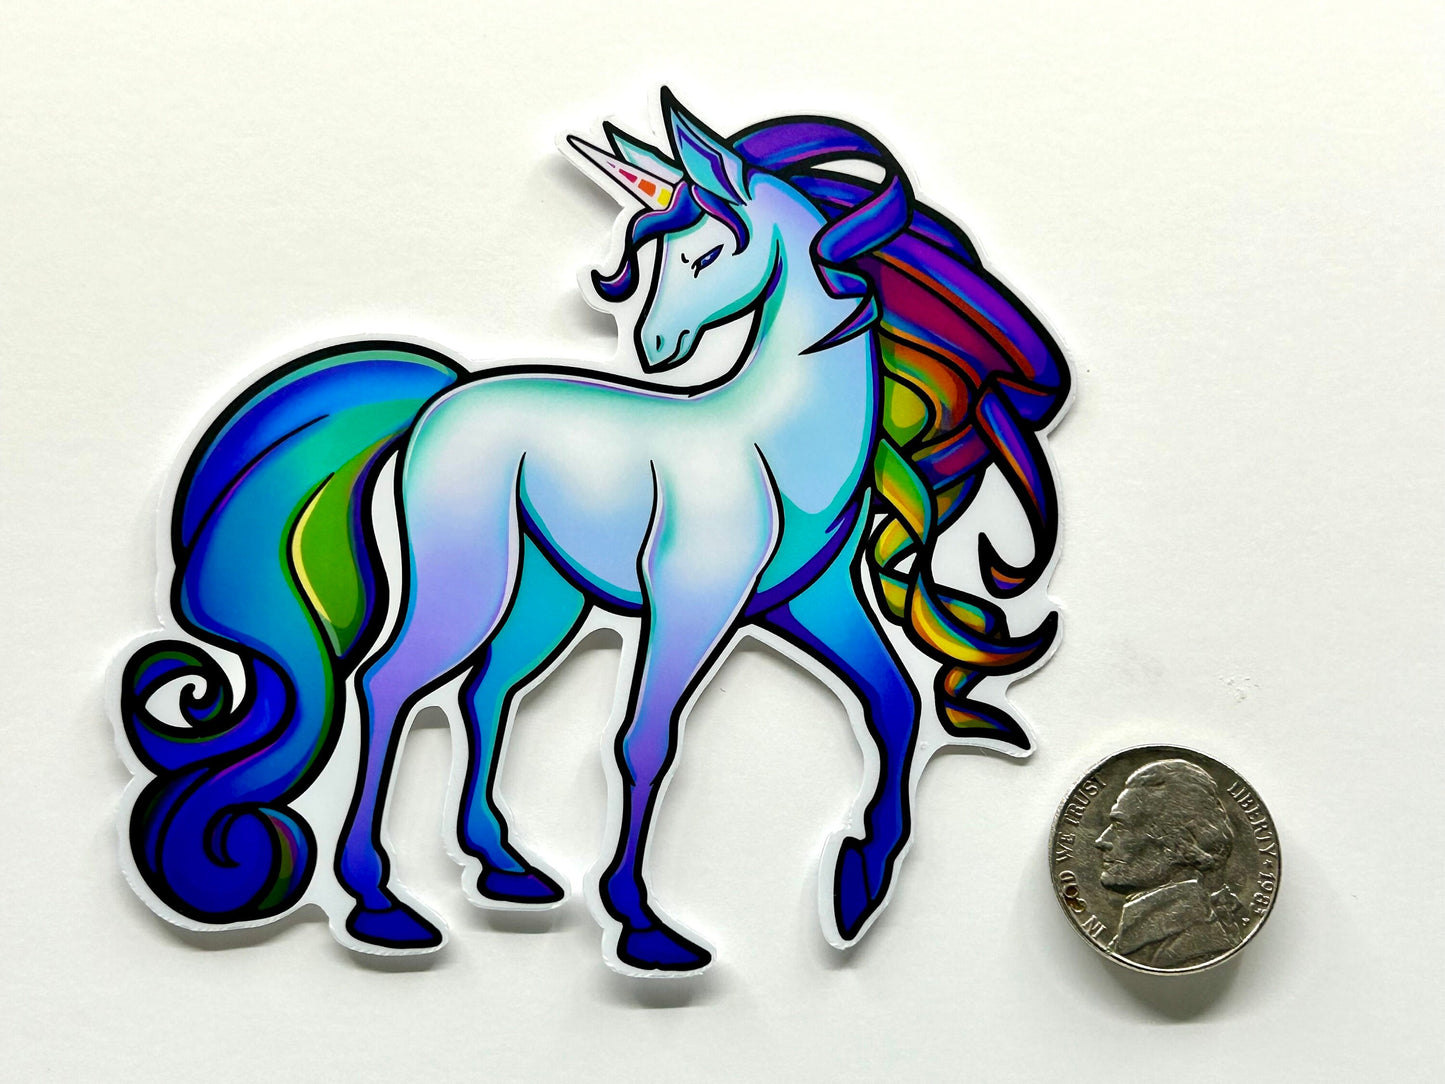 Fairy-tale Unicorn Vinyl Sticker - 3.5" Magical Decal for Laptops & Gifts